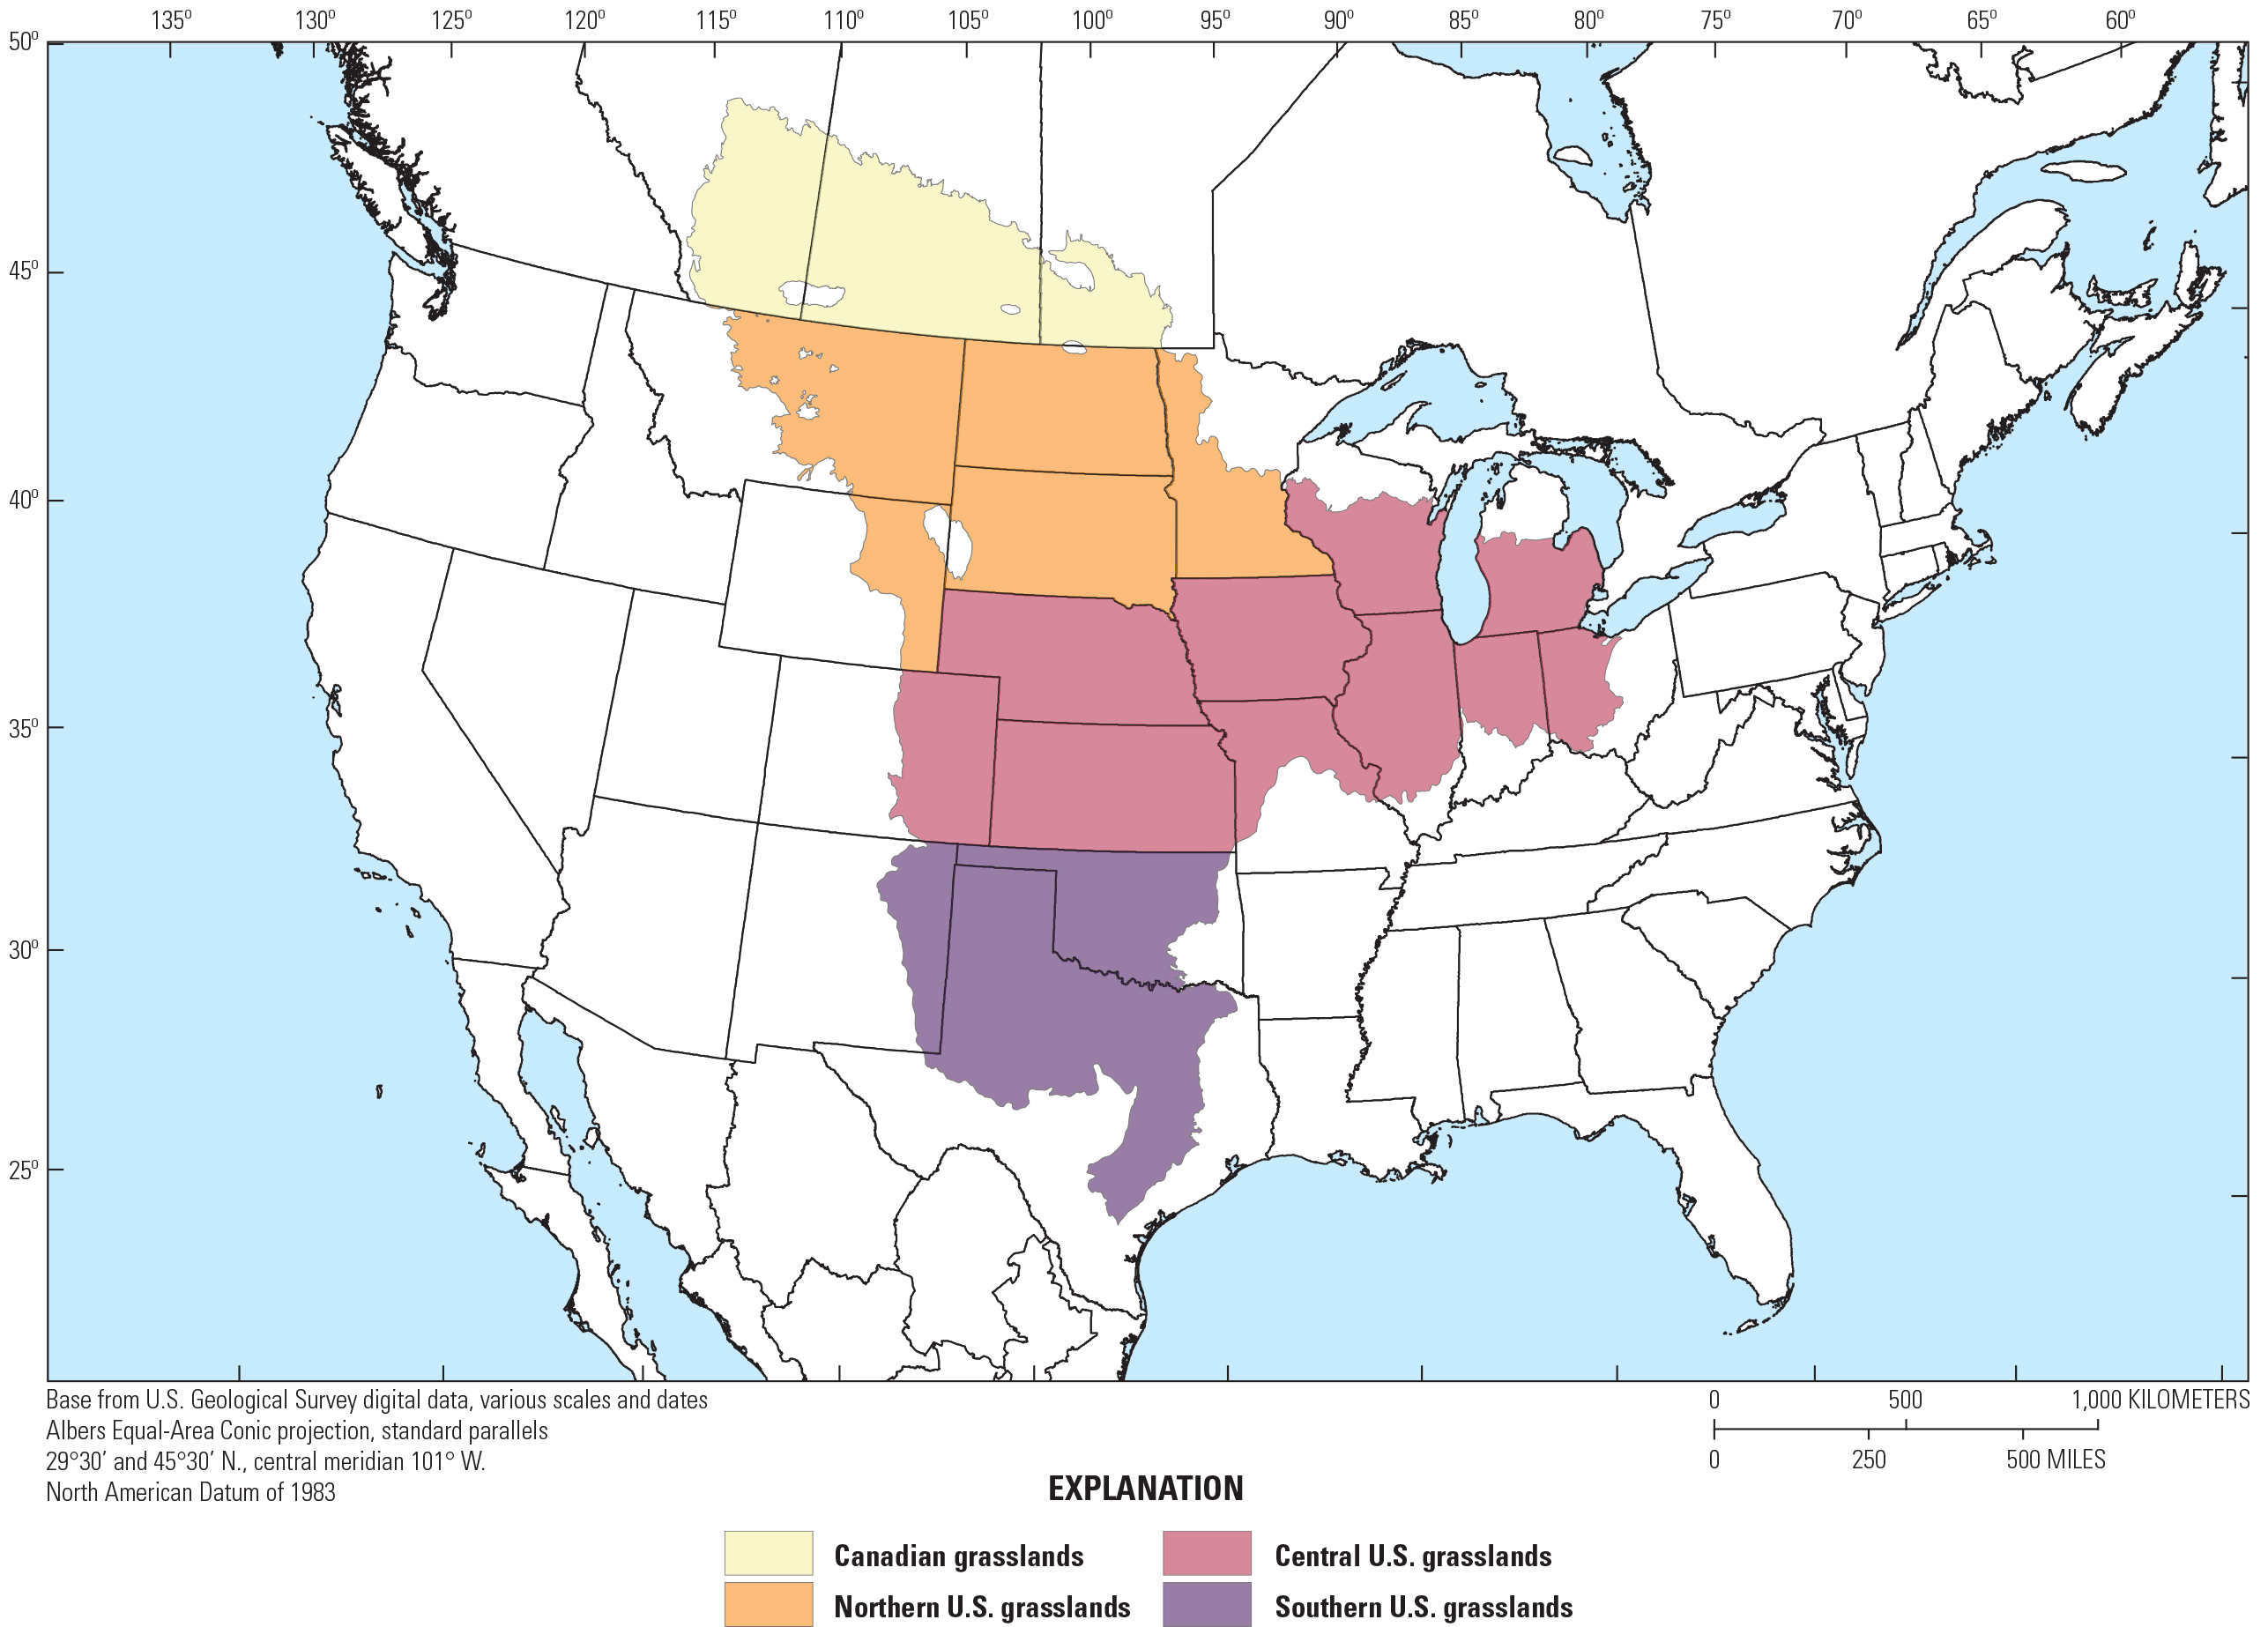 Figure showing the four author-defined regions used to summarize seasonal occurrence
                        and nesting phenology information for grassland birds.